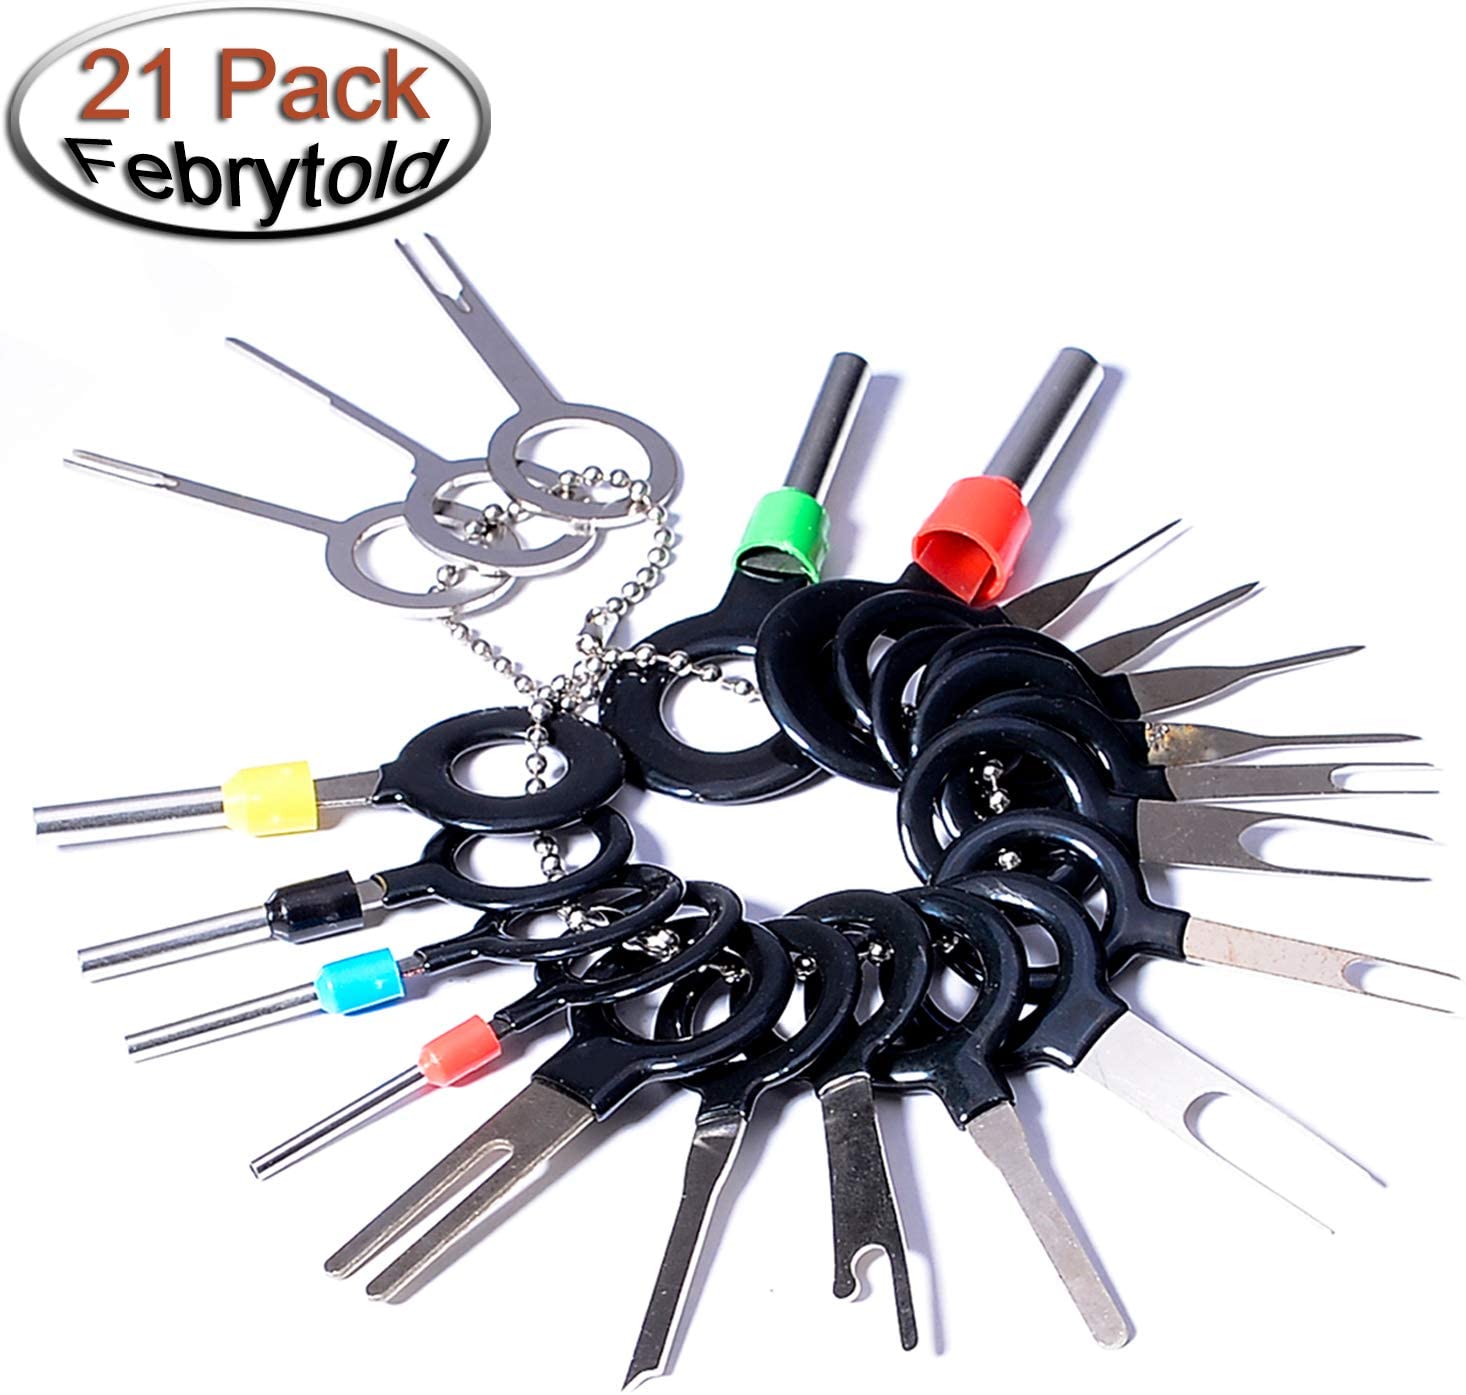 Smyble Terminal Removal Tool kit for Car 52Pcs Pins Terminals Puller Repair Removal Tools for Car Pin Extractor Electrical Wiring Crimp Connectors